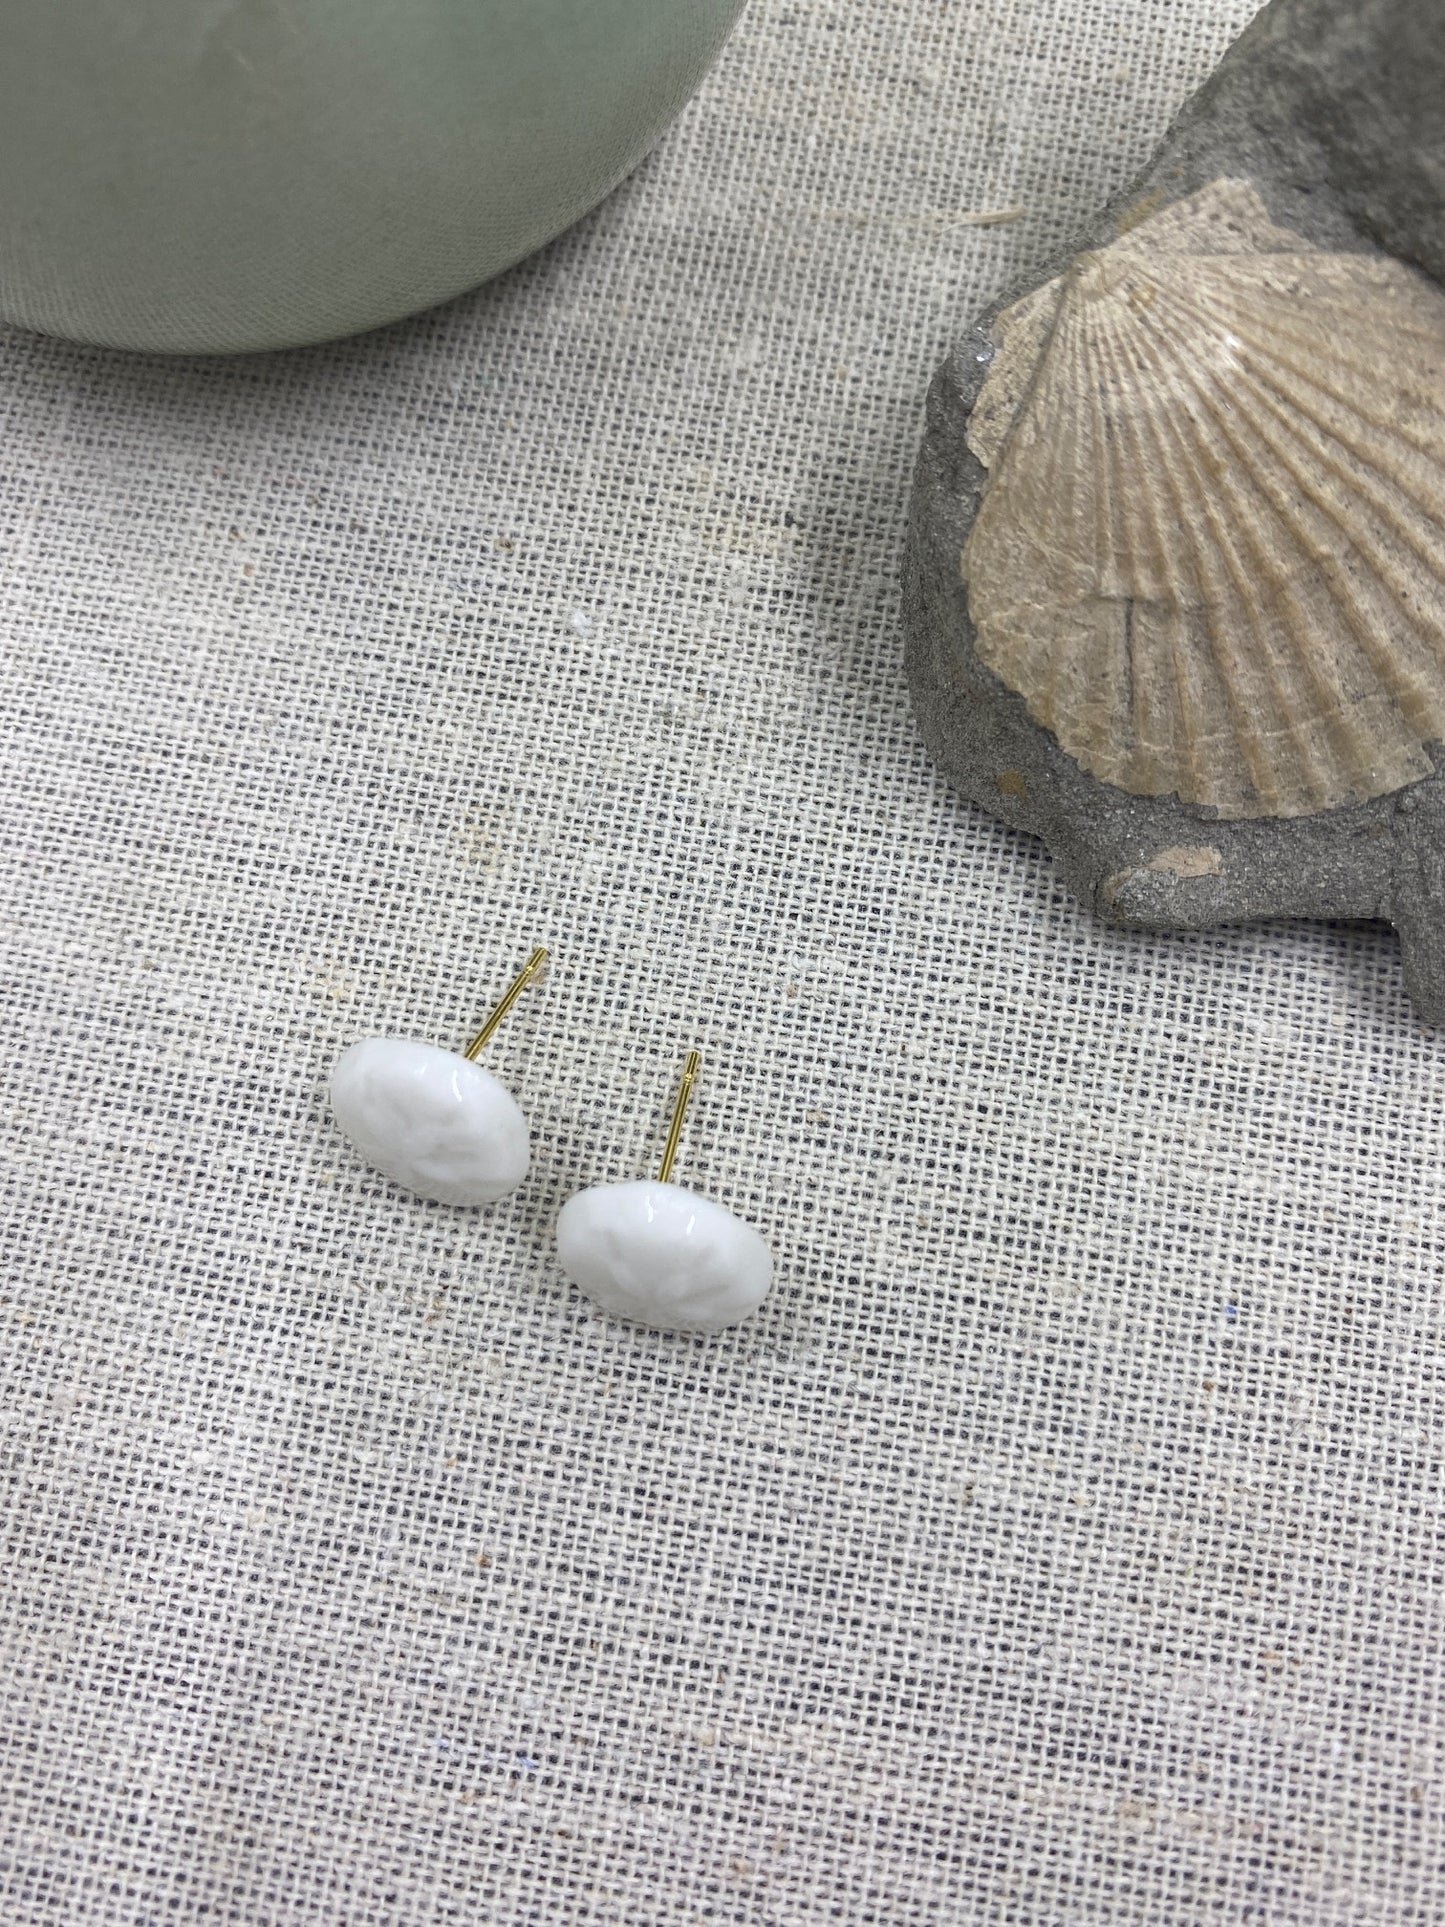 Sand Dollar Earrings-white, navy, sea green, or coral